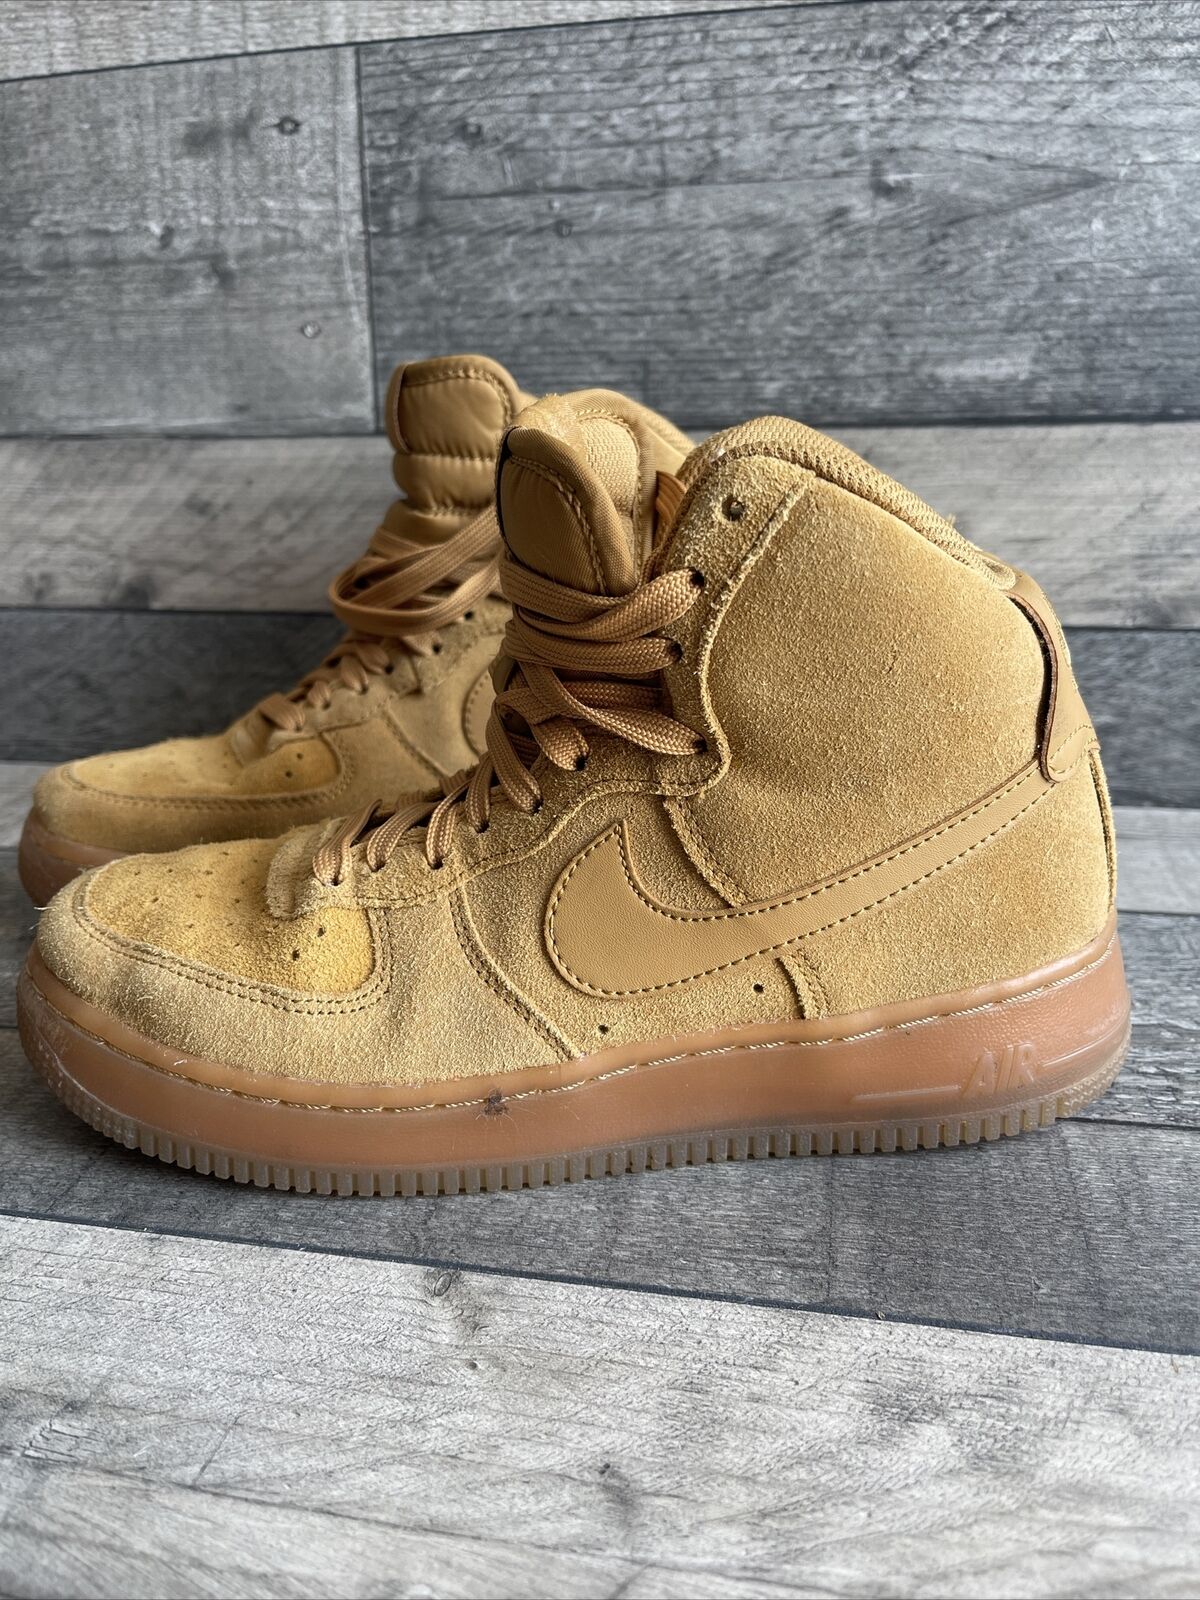 Nike Air Force 1 High LV8 3 Wheat Tan Trainers Size UK 5.5 CK0262